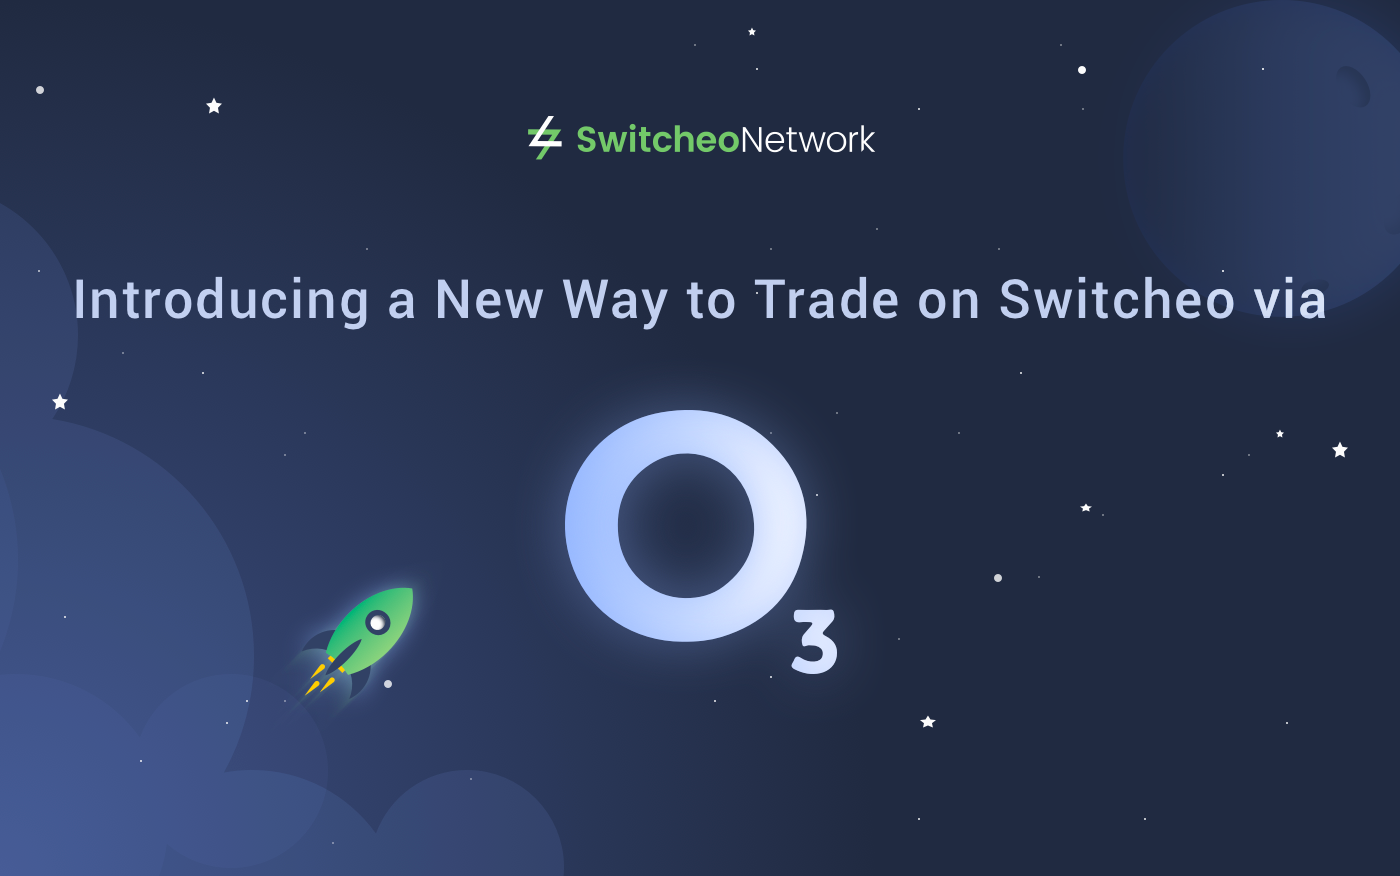 Introducing a New Way to Trade on Switcheo via O3!